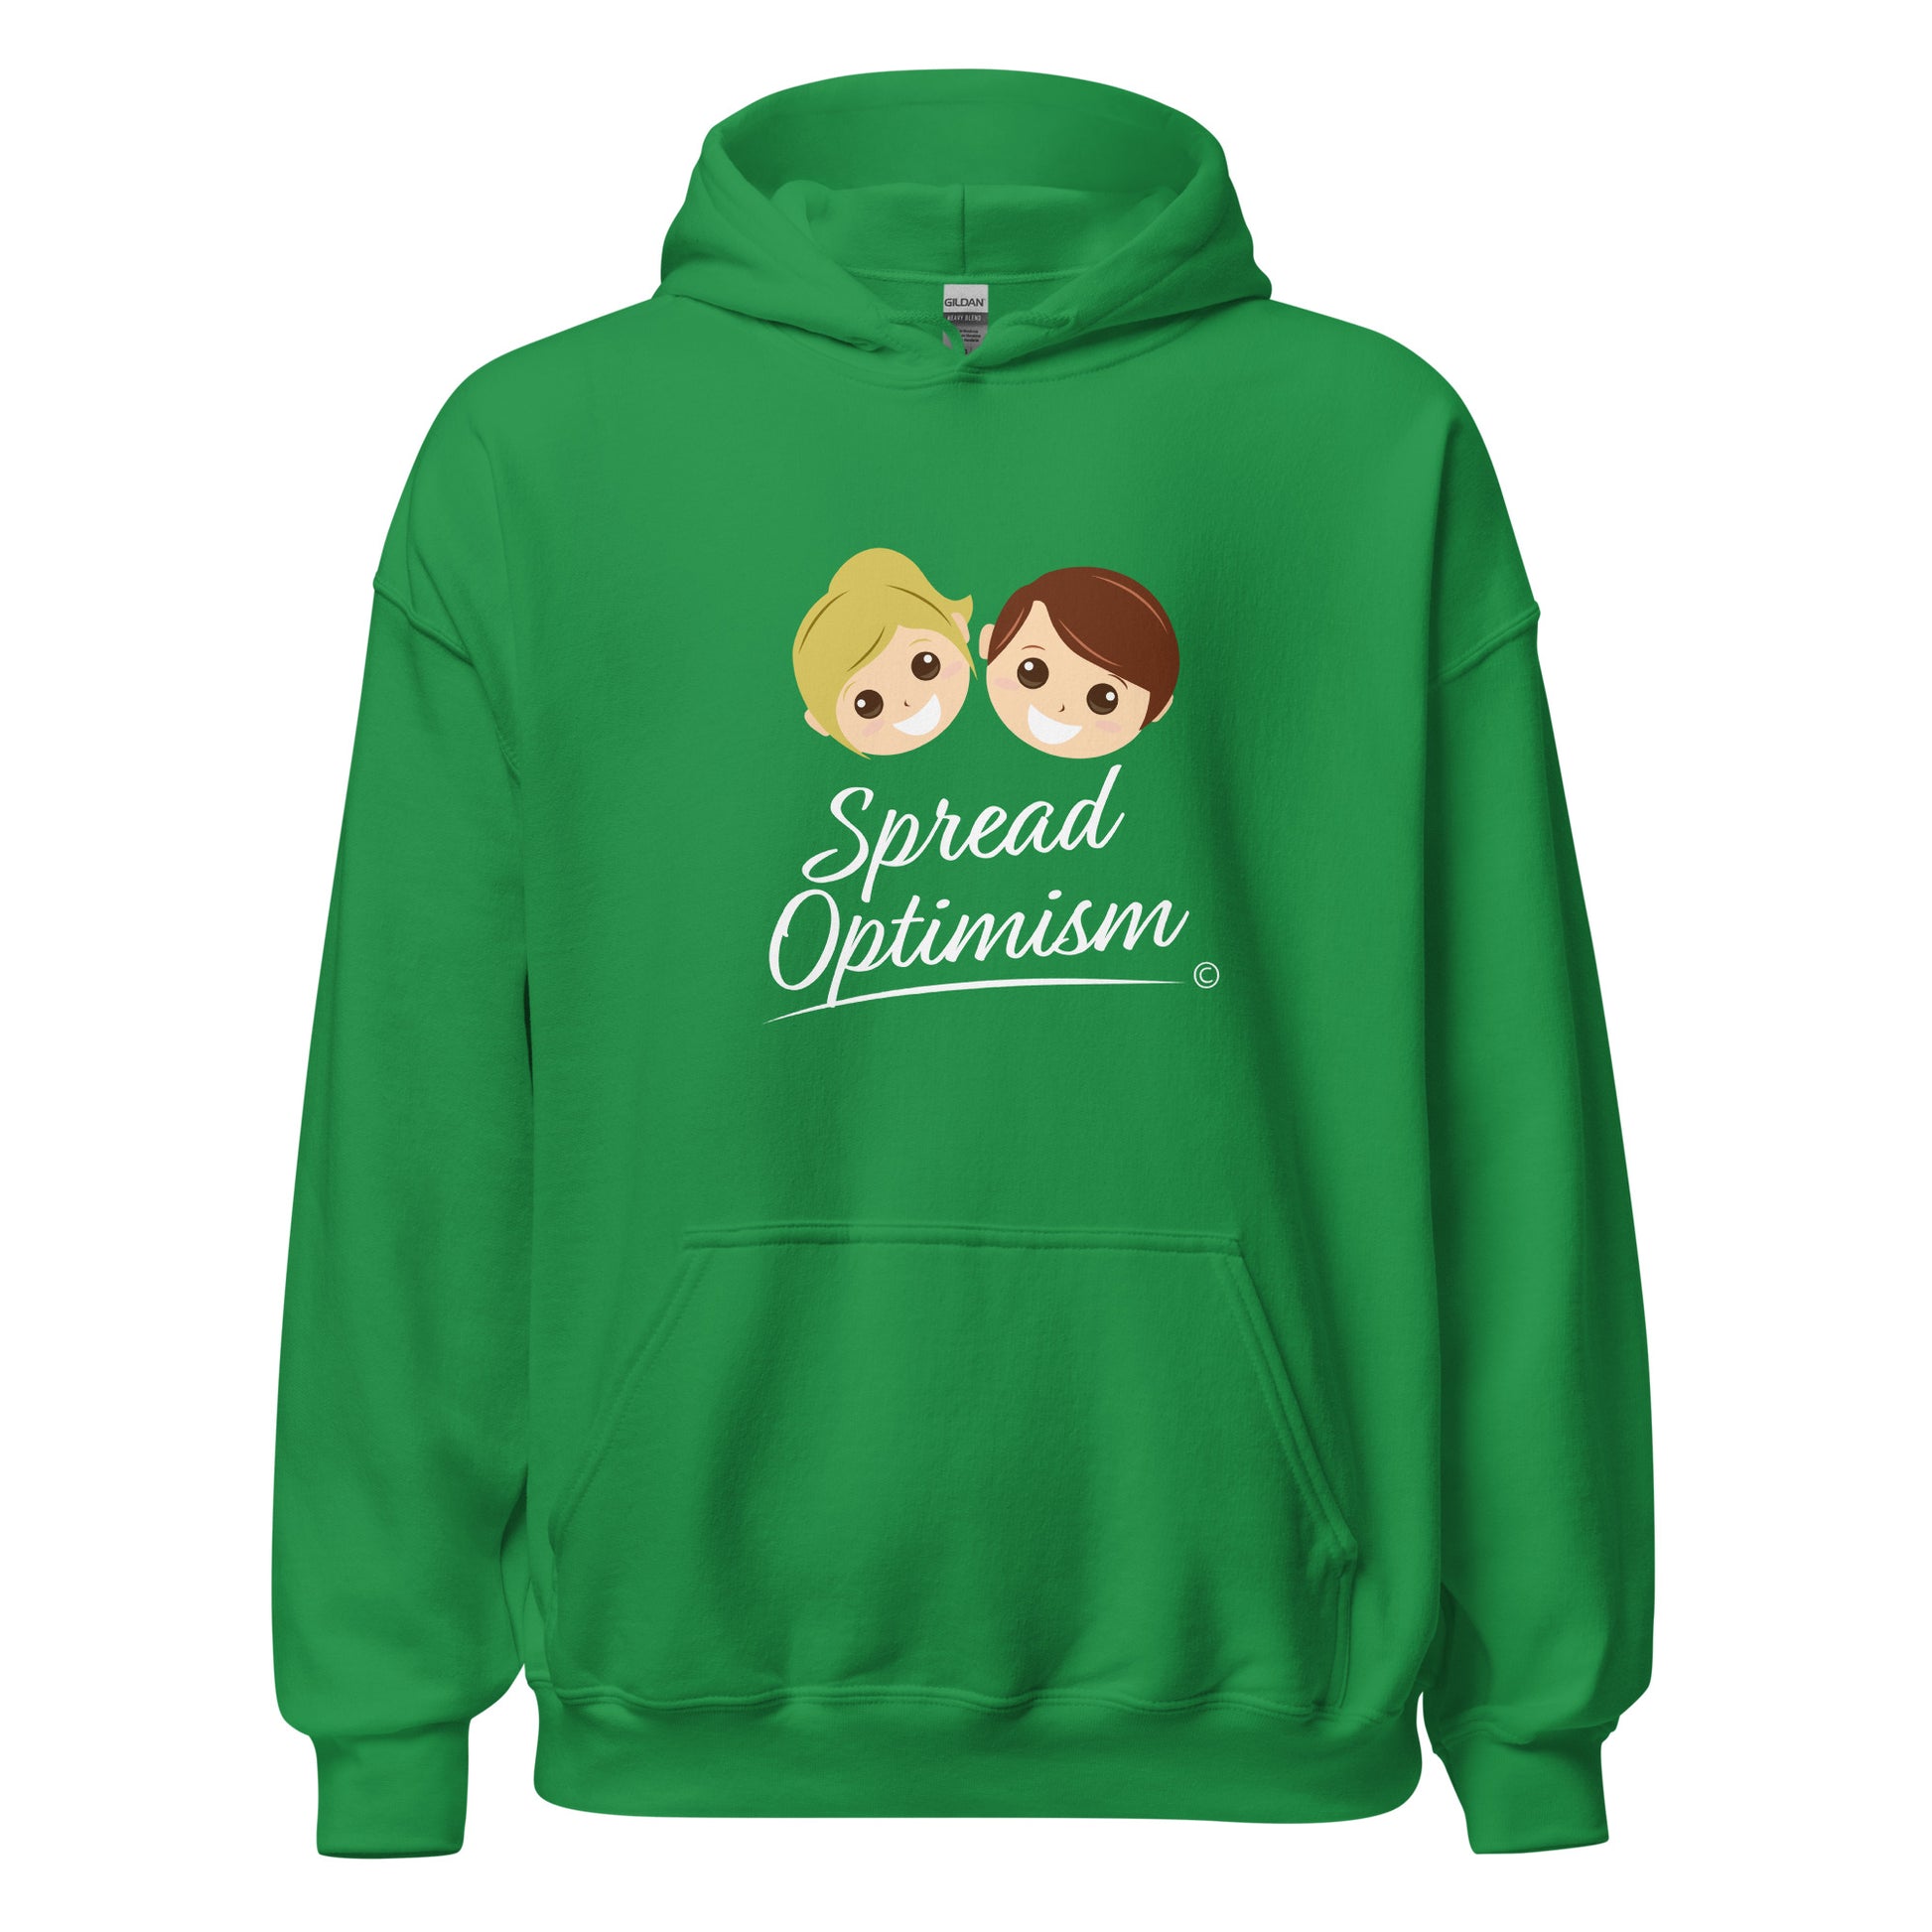 Outdoor unisex hoodies for him and her-Irish Green